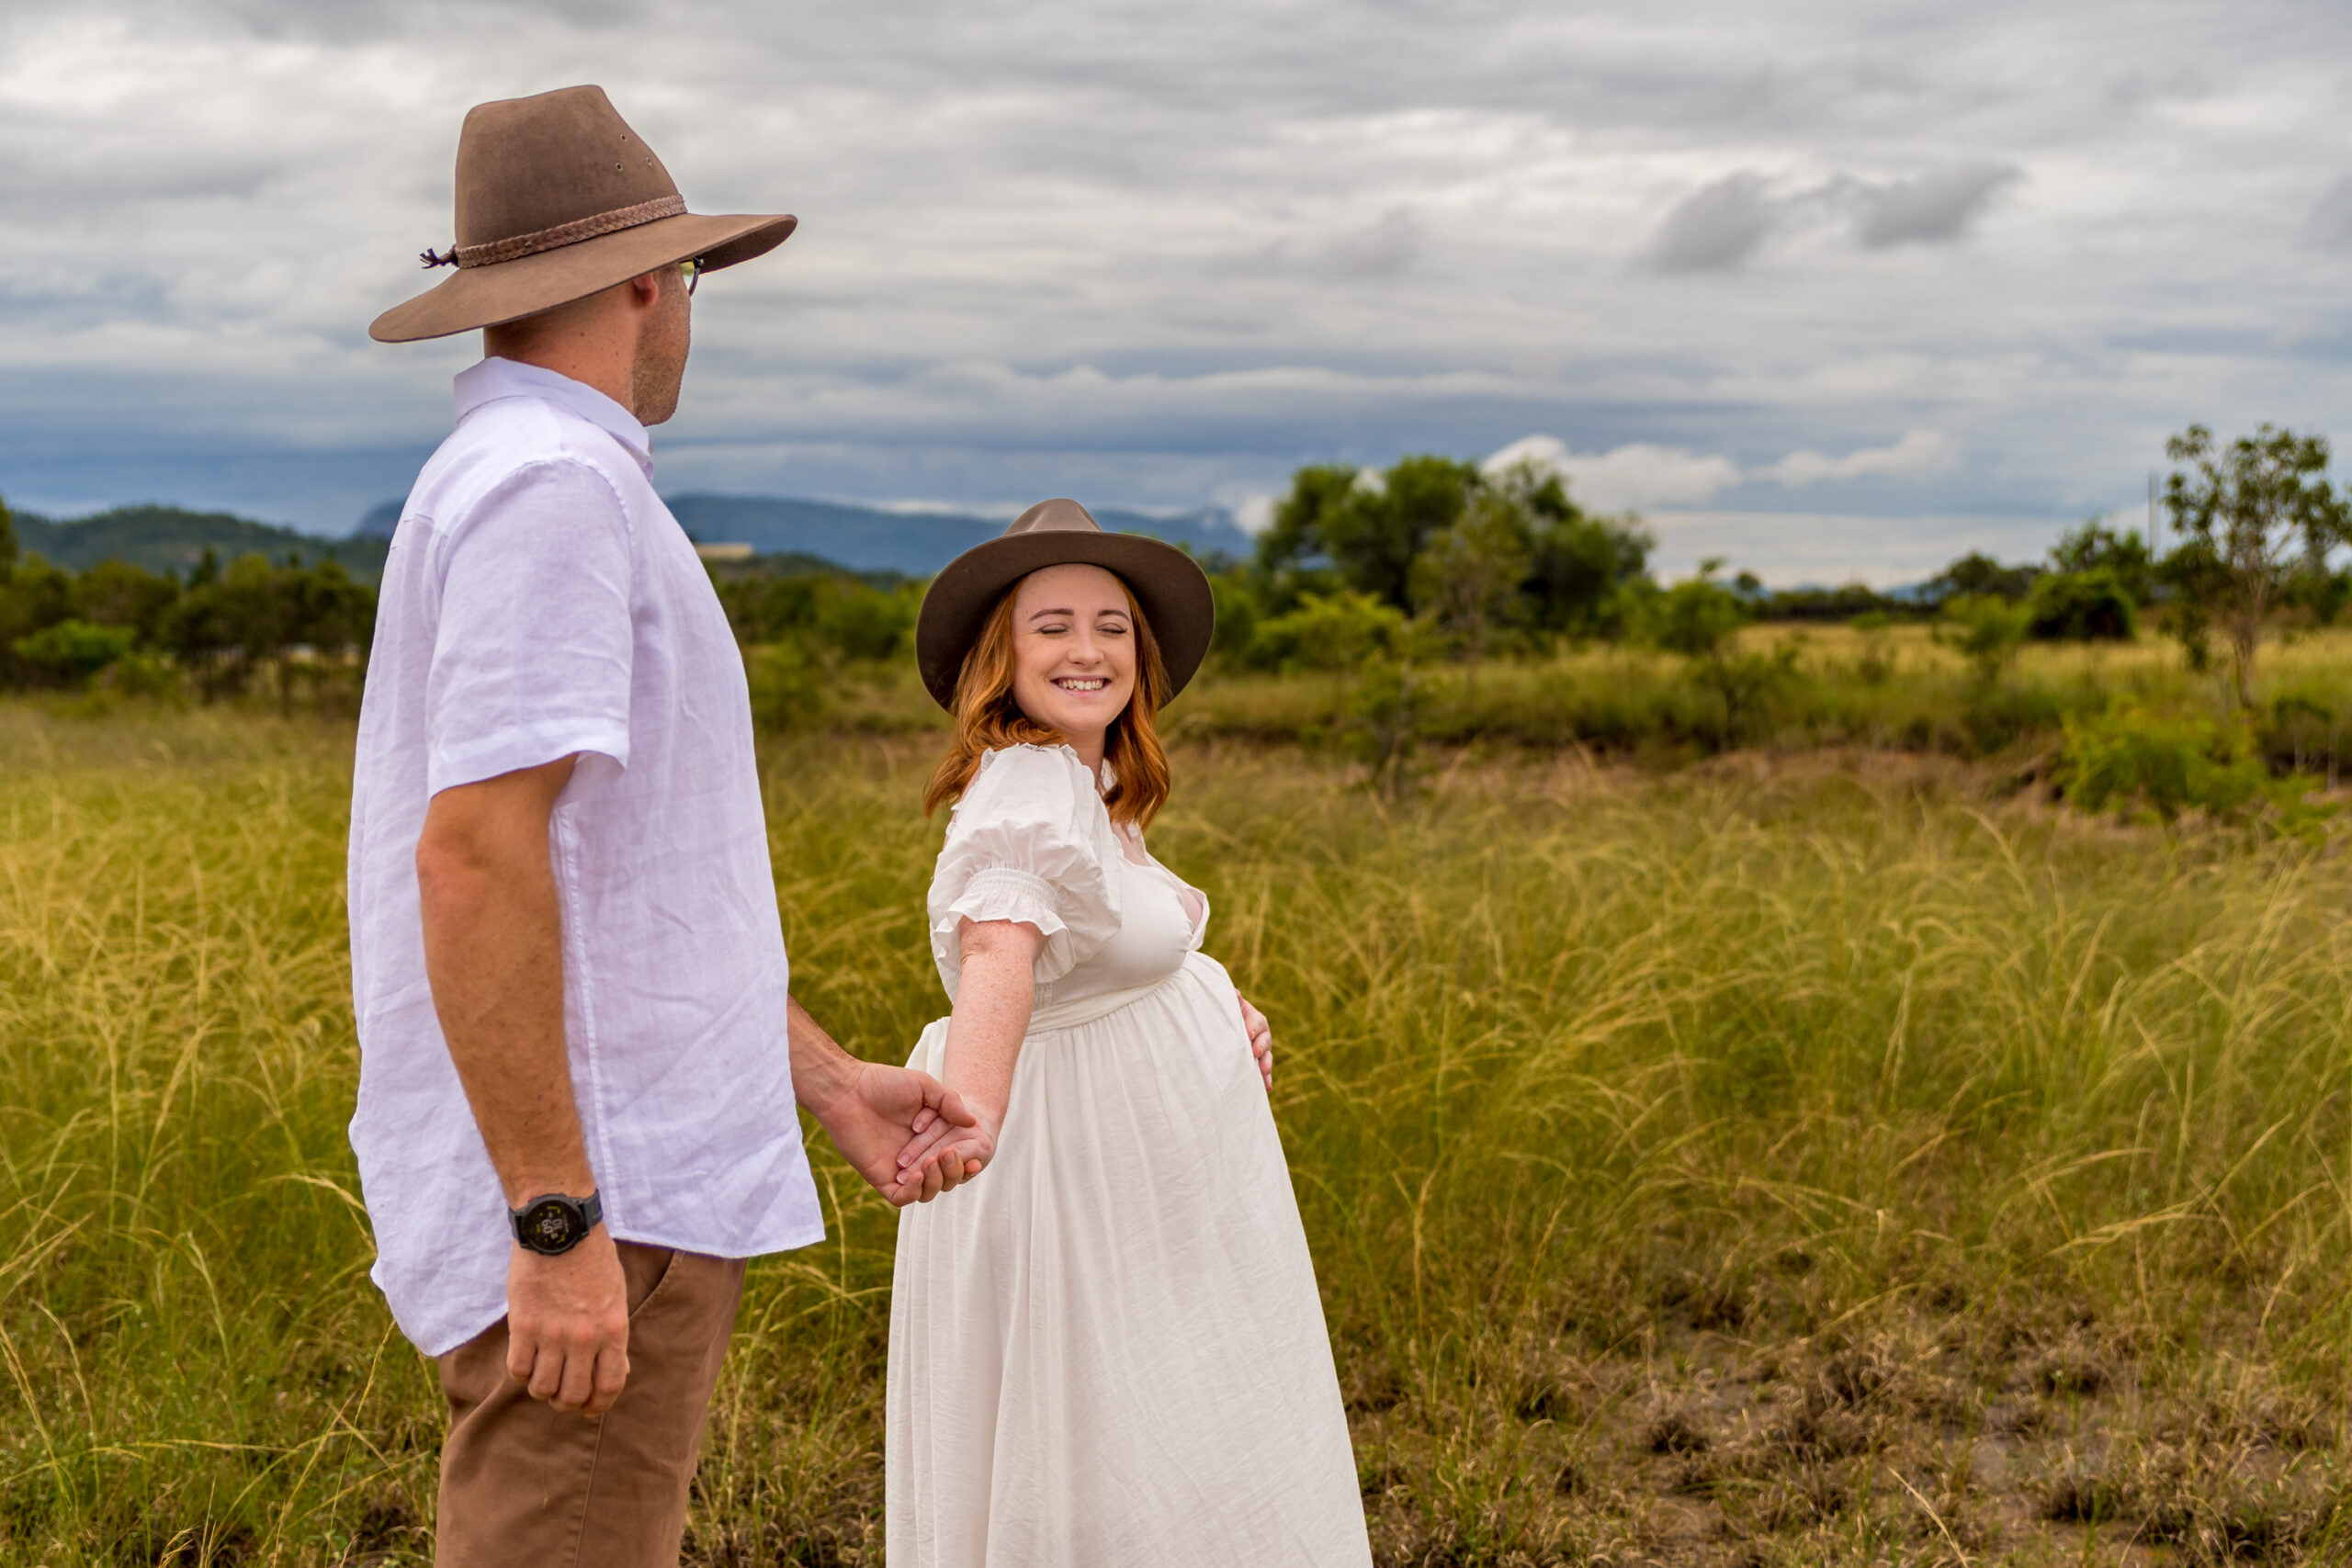 pregnant woman in white maternity gown holding her baby belly and leading her partner through a townsville paddock while looking back at her partner smiling - maternity photography by Jamie Simmons